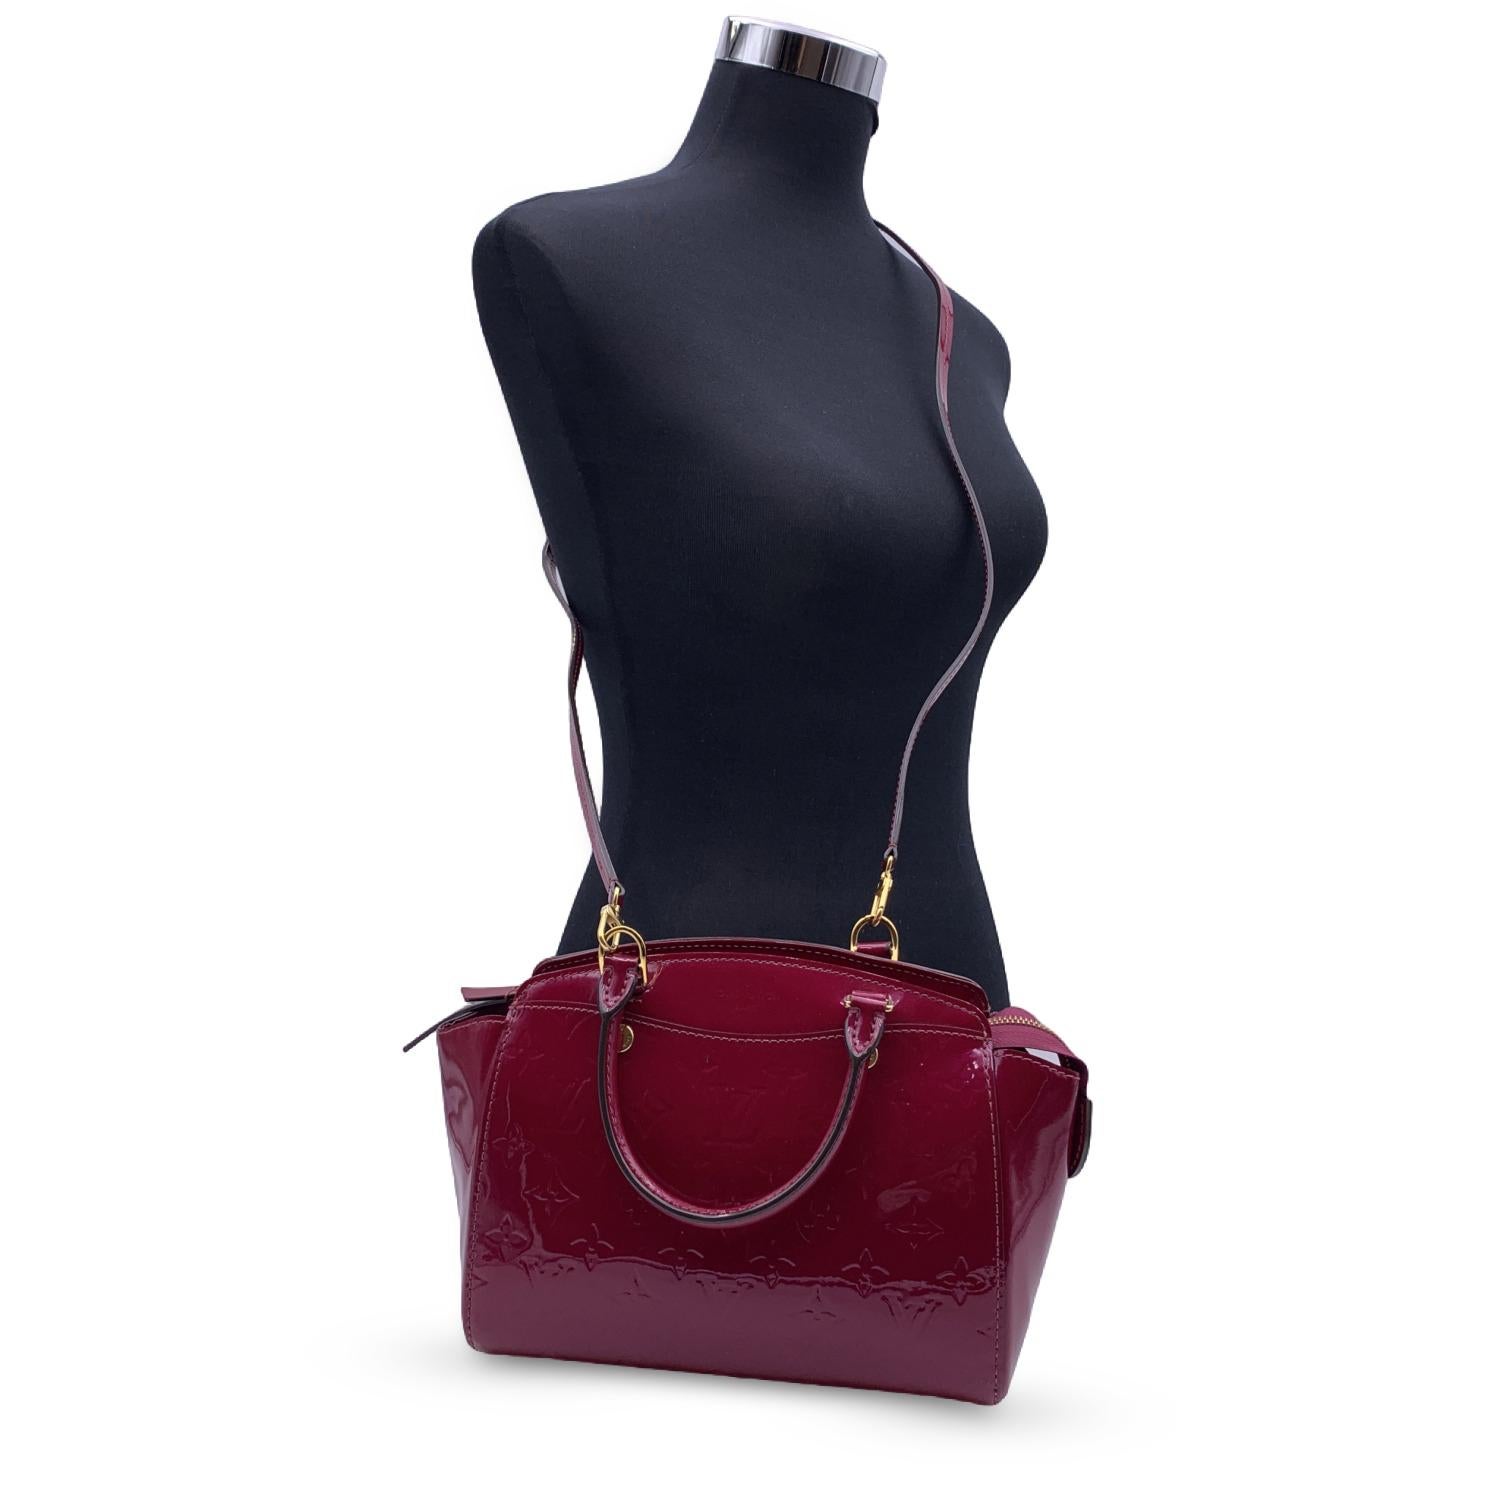 This beautiful Bag will come with a Certificate of Authenticity provided by Entrupy. The certificate will be provided at no further cost.

Louis Vuitton 'Brea PM' bag in red magenta monogram vernis leather. Double top handles and removable shoulder